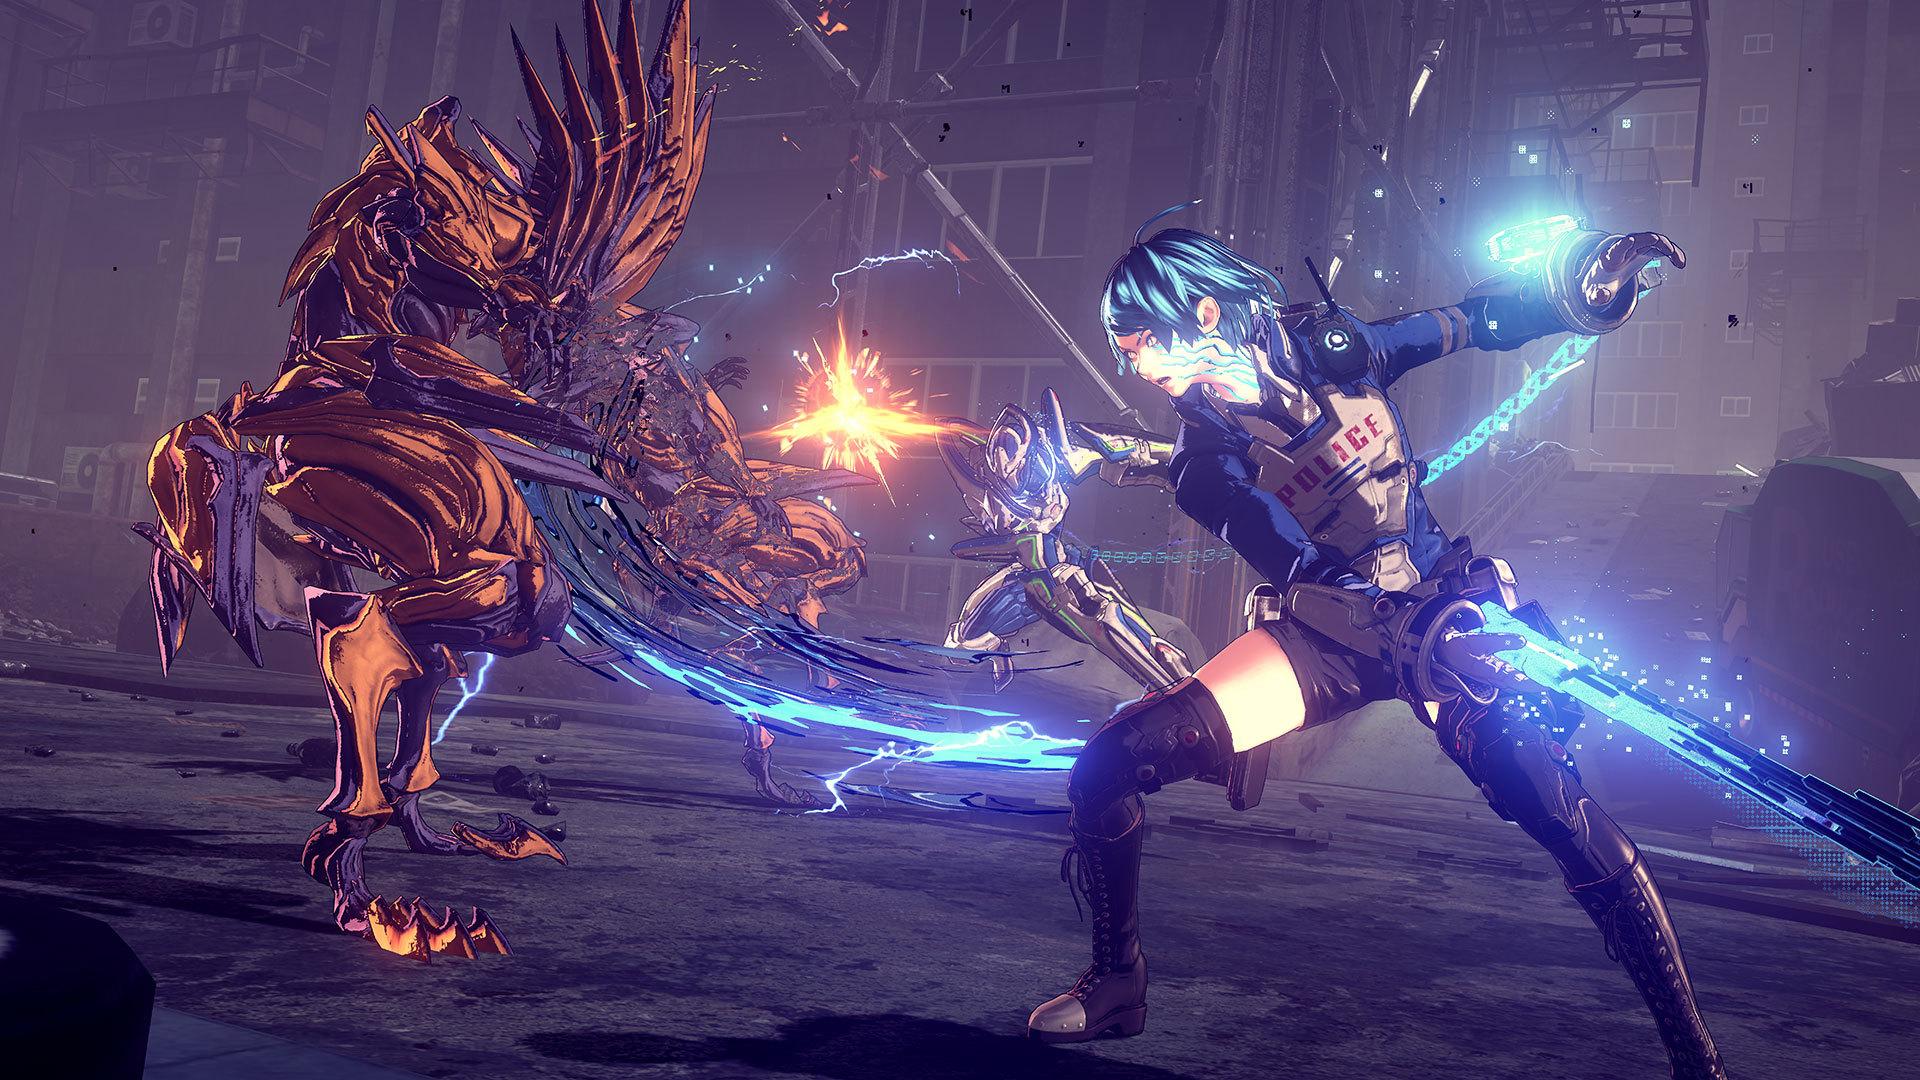 Astral Chain Review Roundup (Switch): Here's What Critics Are Saying